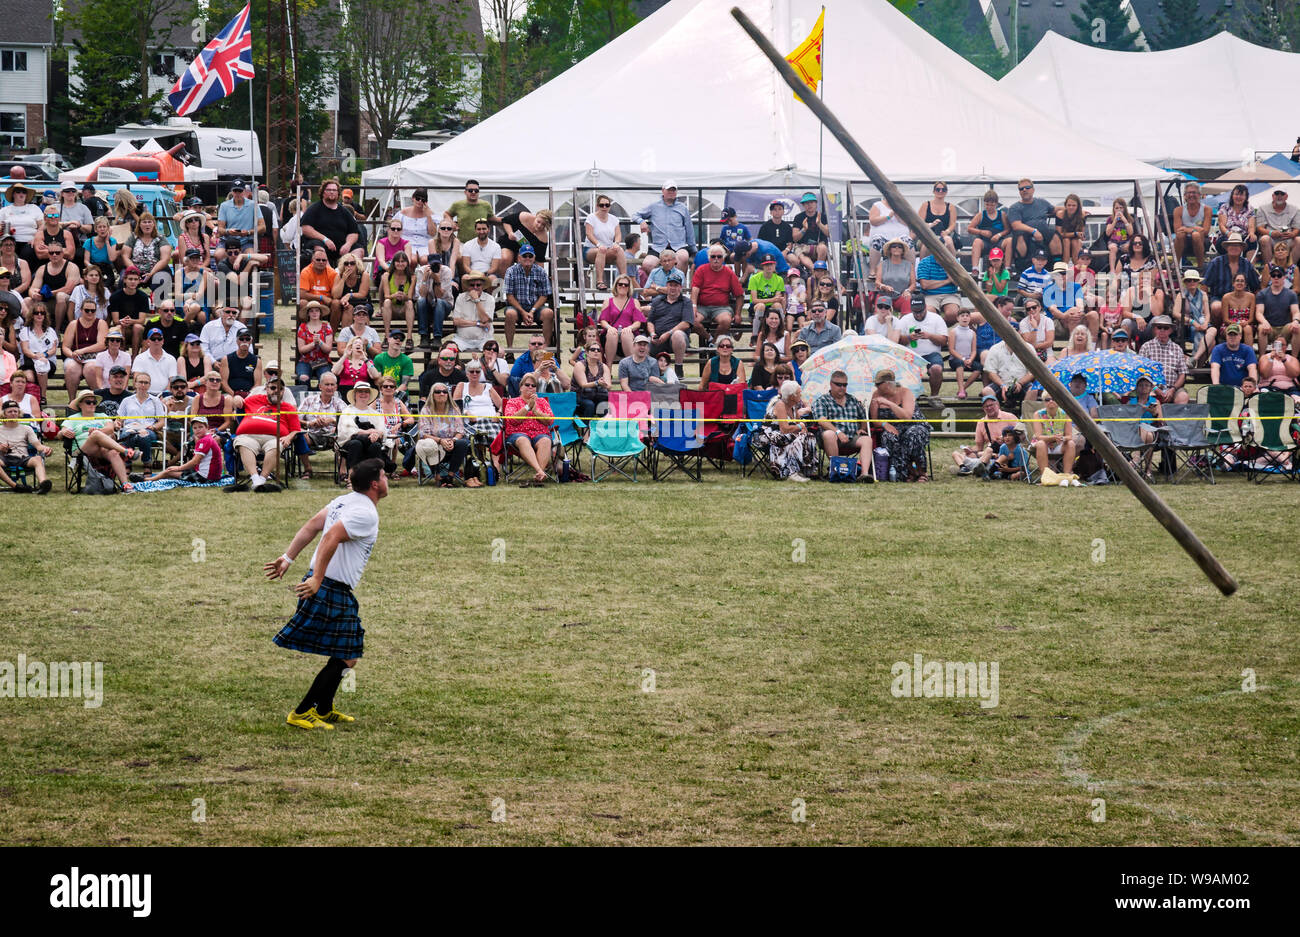 Fergus, Ontario, Canada - 08 11 2018: Traditional Scottish heavies competitions athlete wearing kilt is demonstrating his skills in a Caber Toss conte Stock Photo